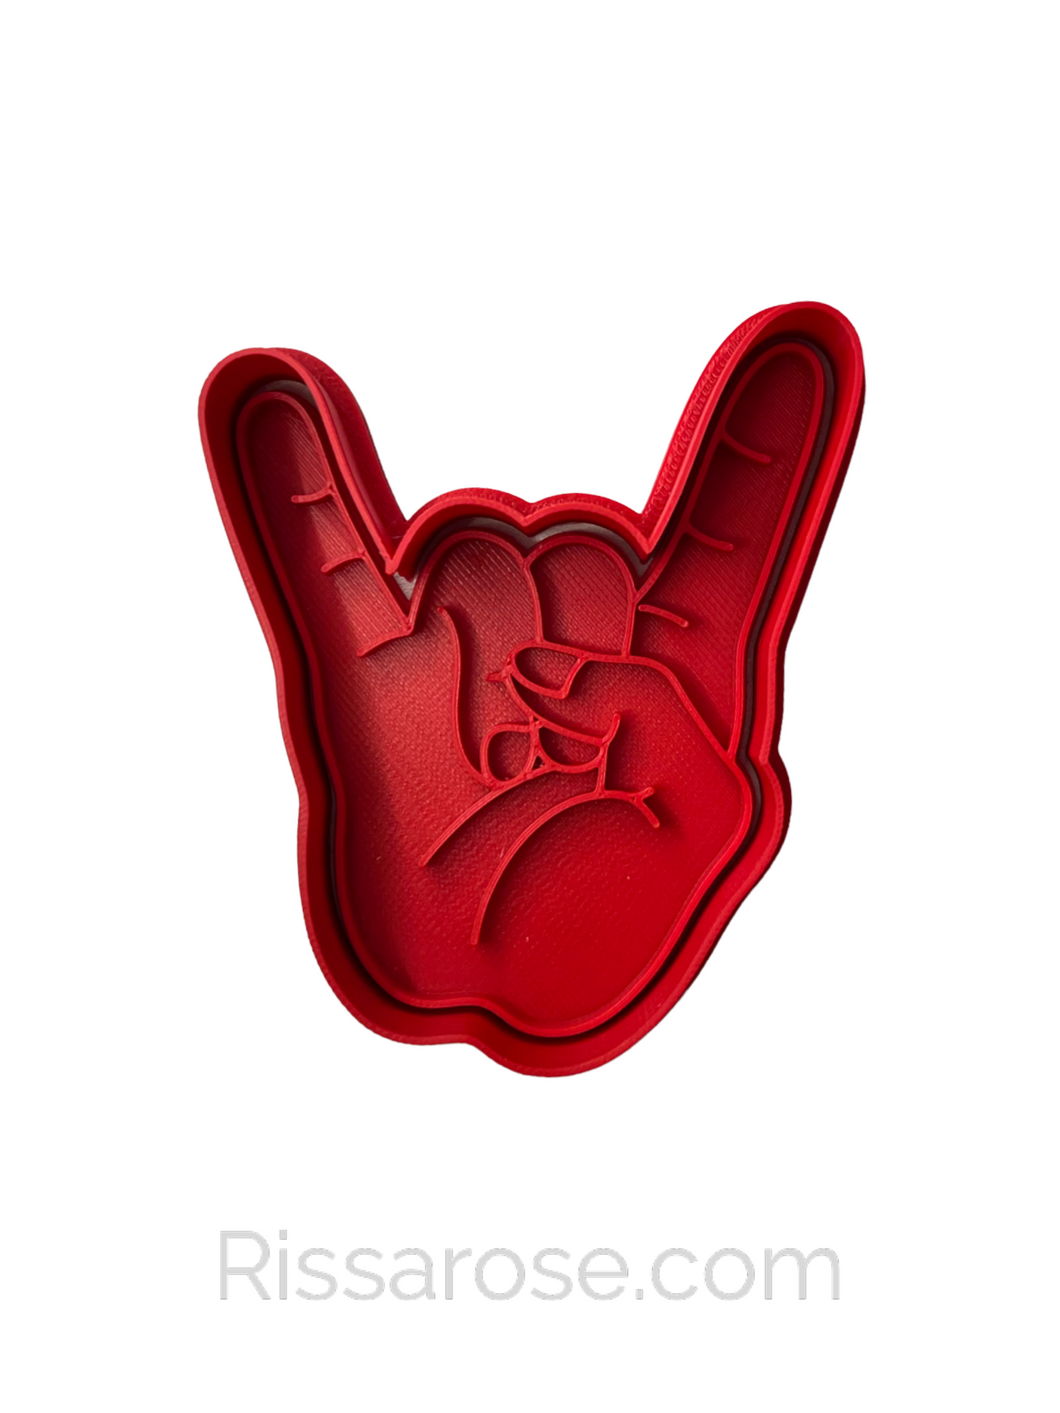 Rock hand gesture cookie cutter stamp - Music theme Rock n Roll